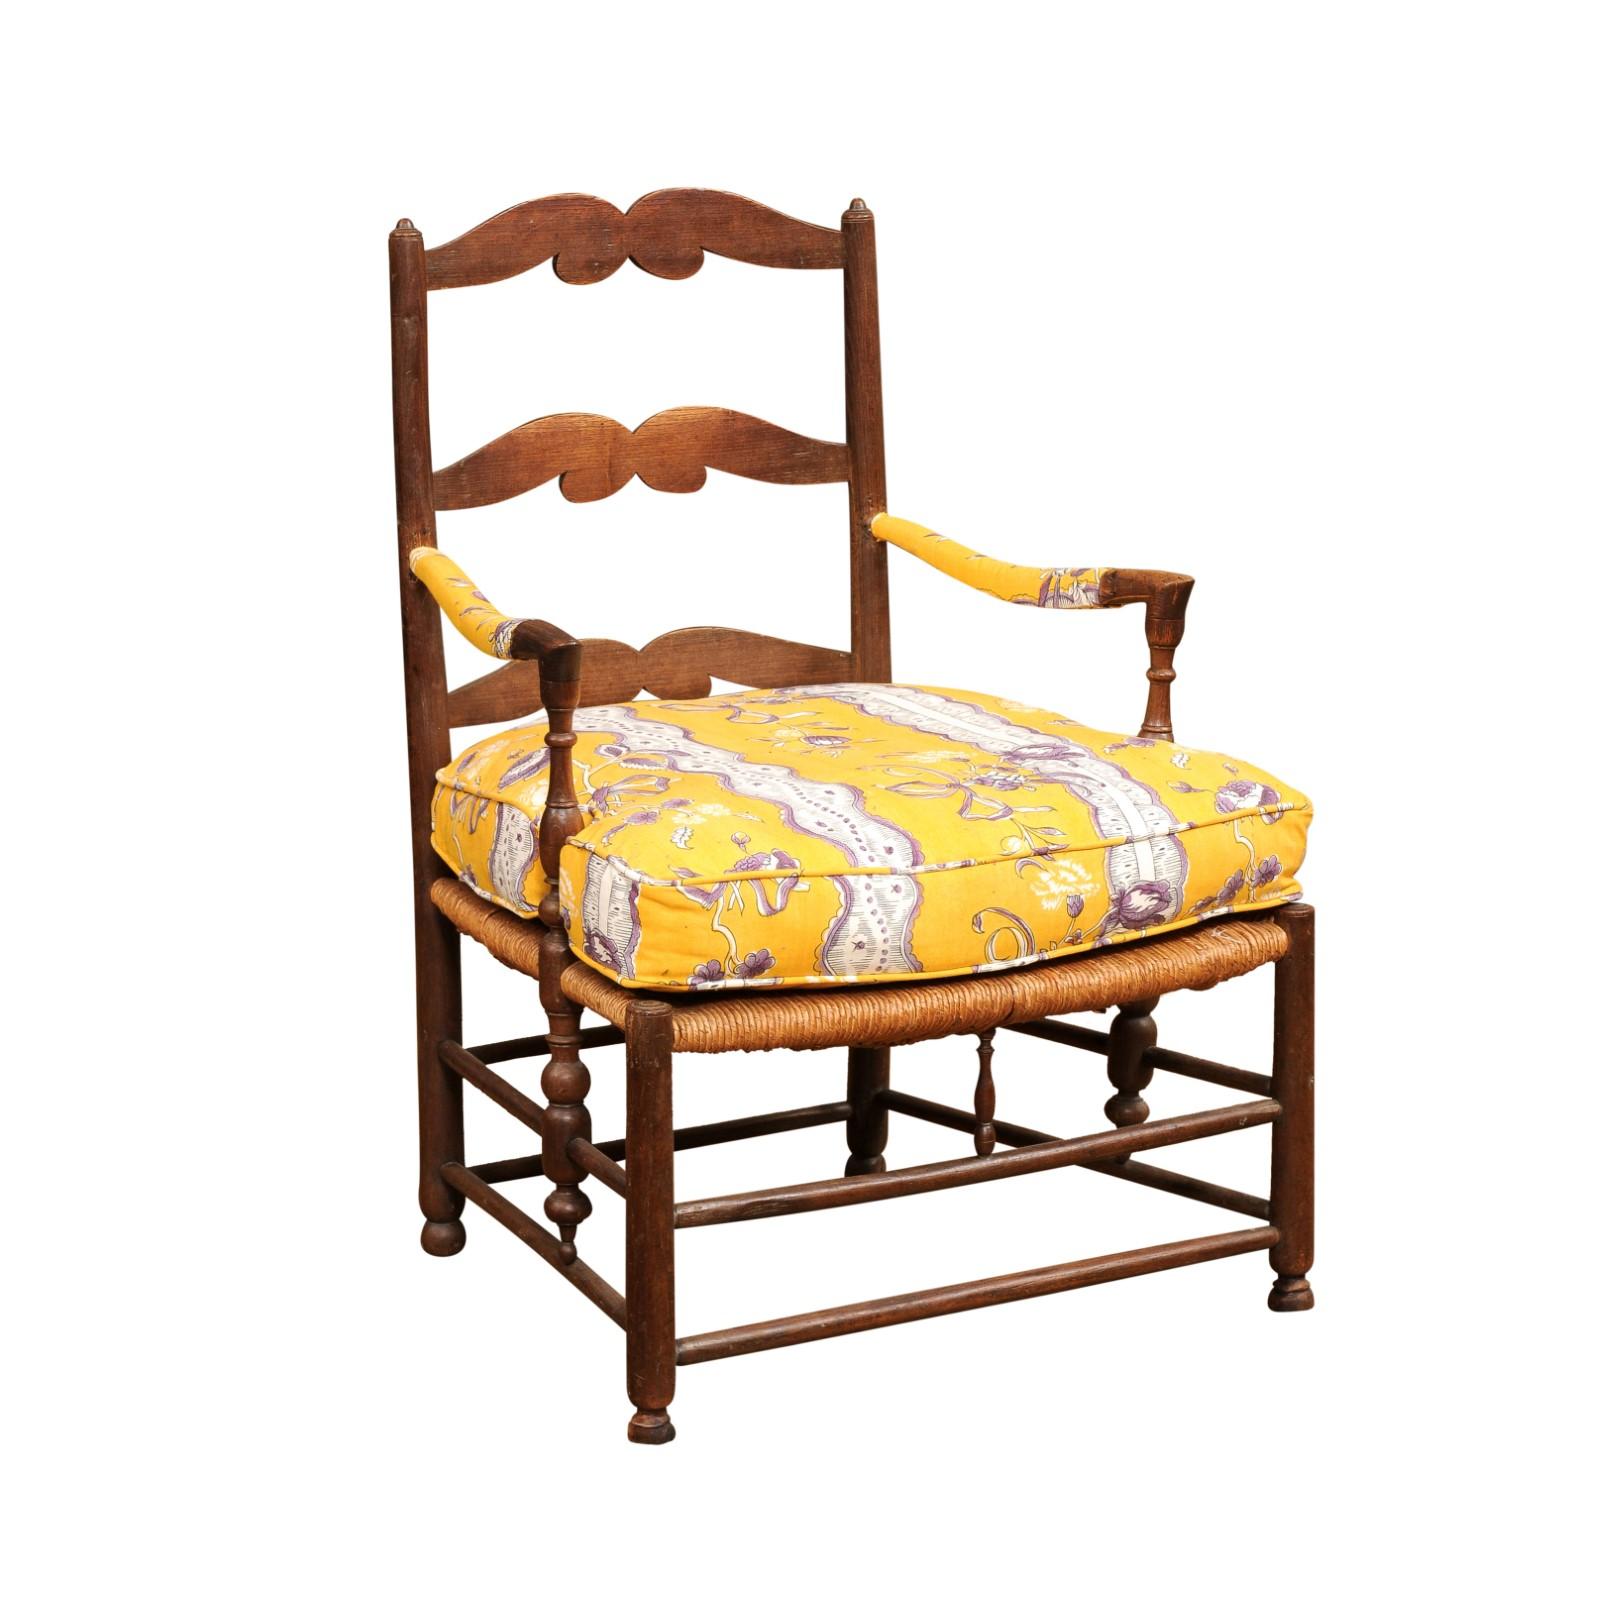 A rustic French walnut armchair from the late 18th century with rush seat, carved ladder back, curving arms and upholstered cushion. Created in France during the later years of the 18th century, this walnut armchair charms us with its rustic